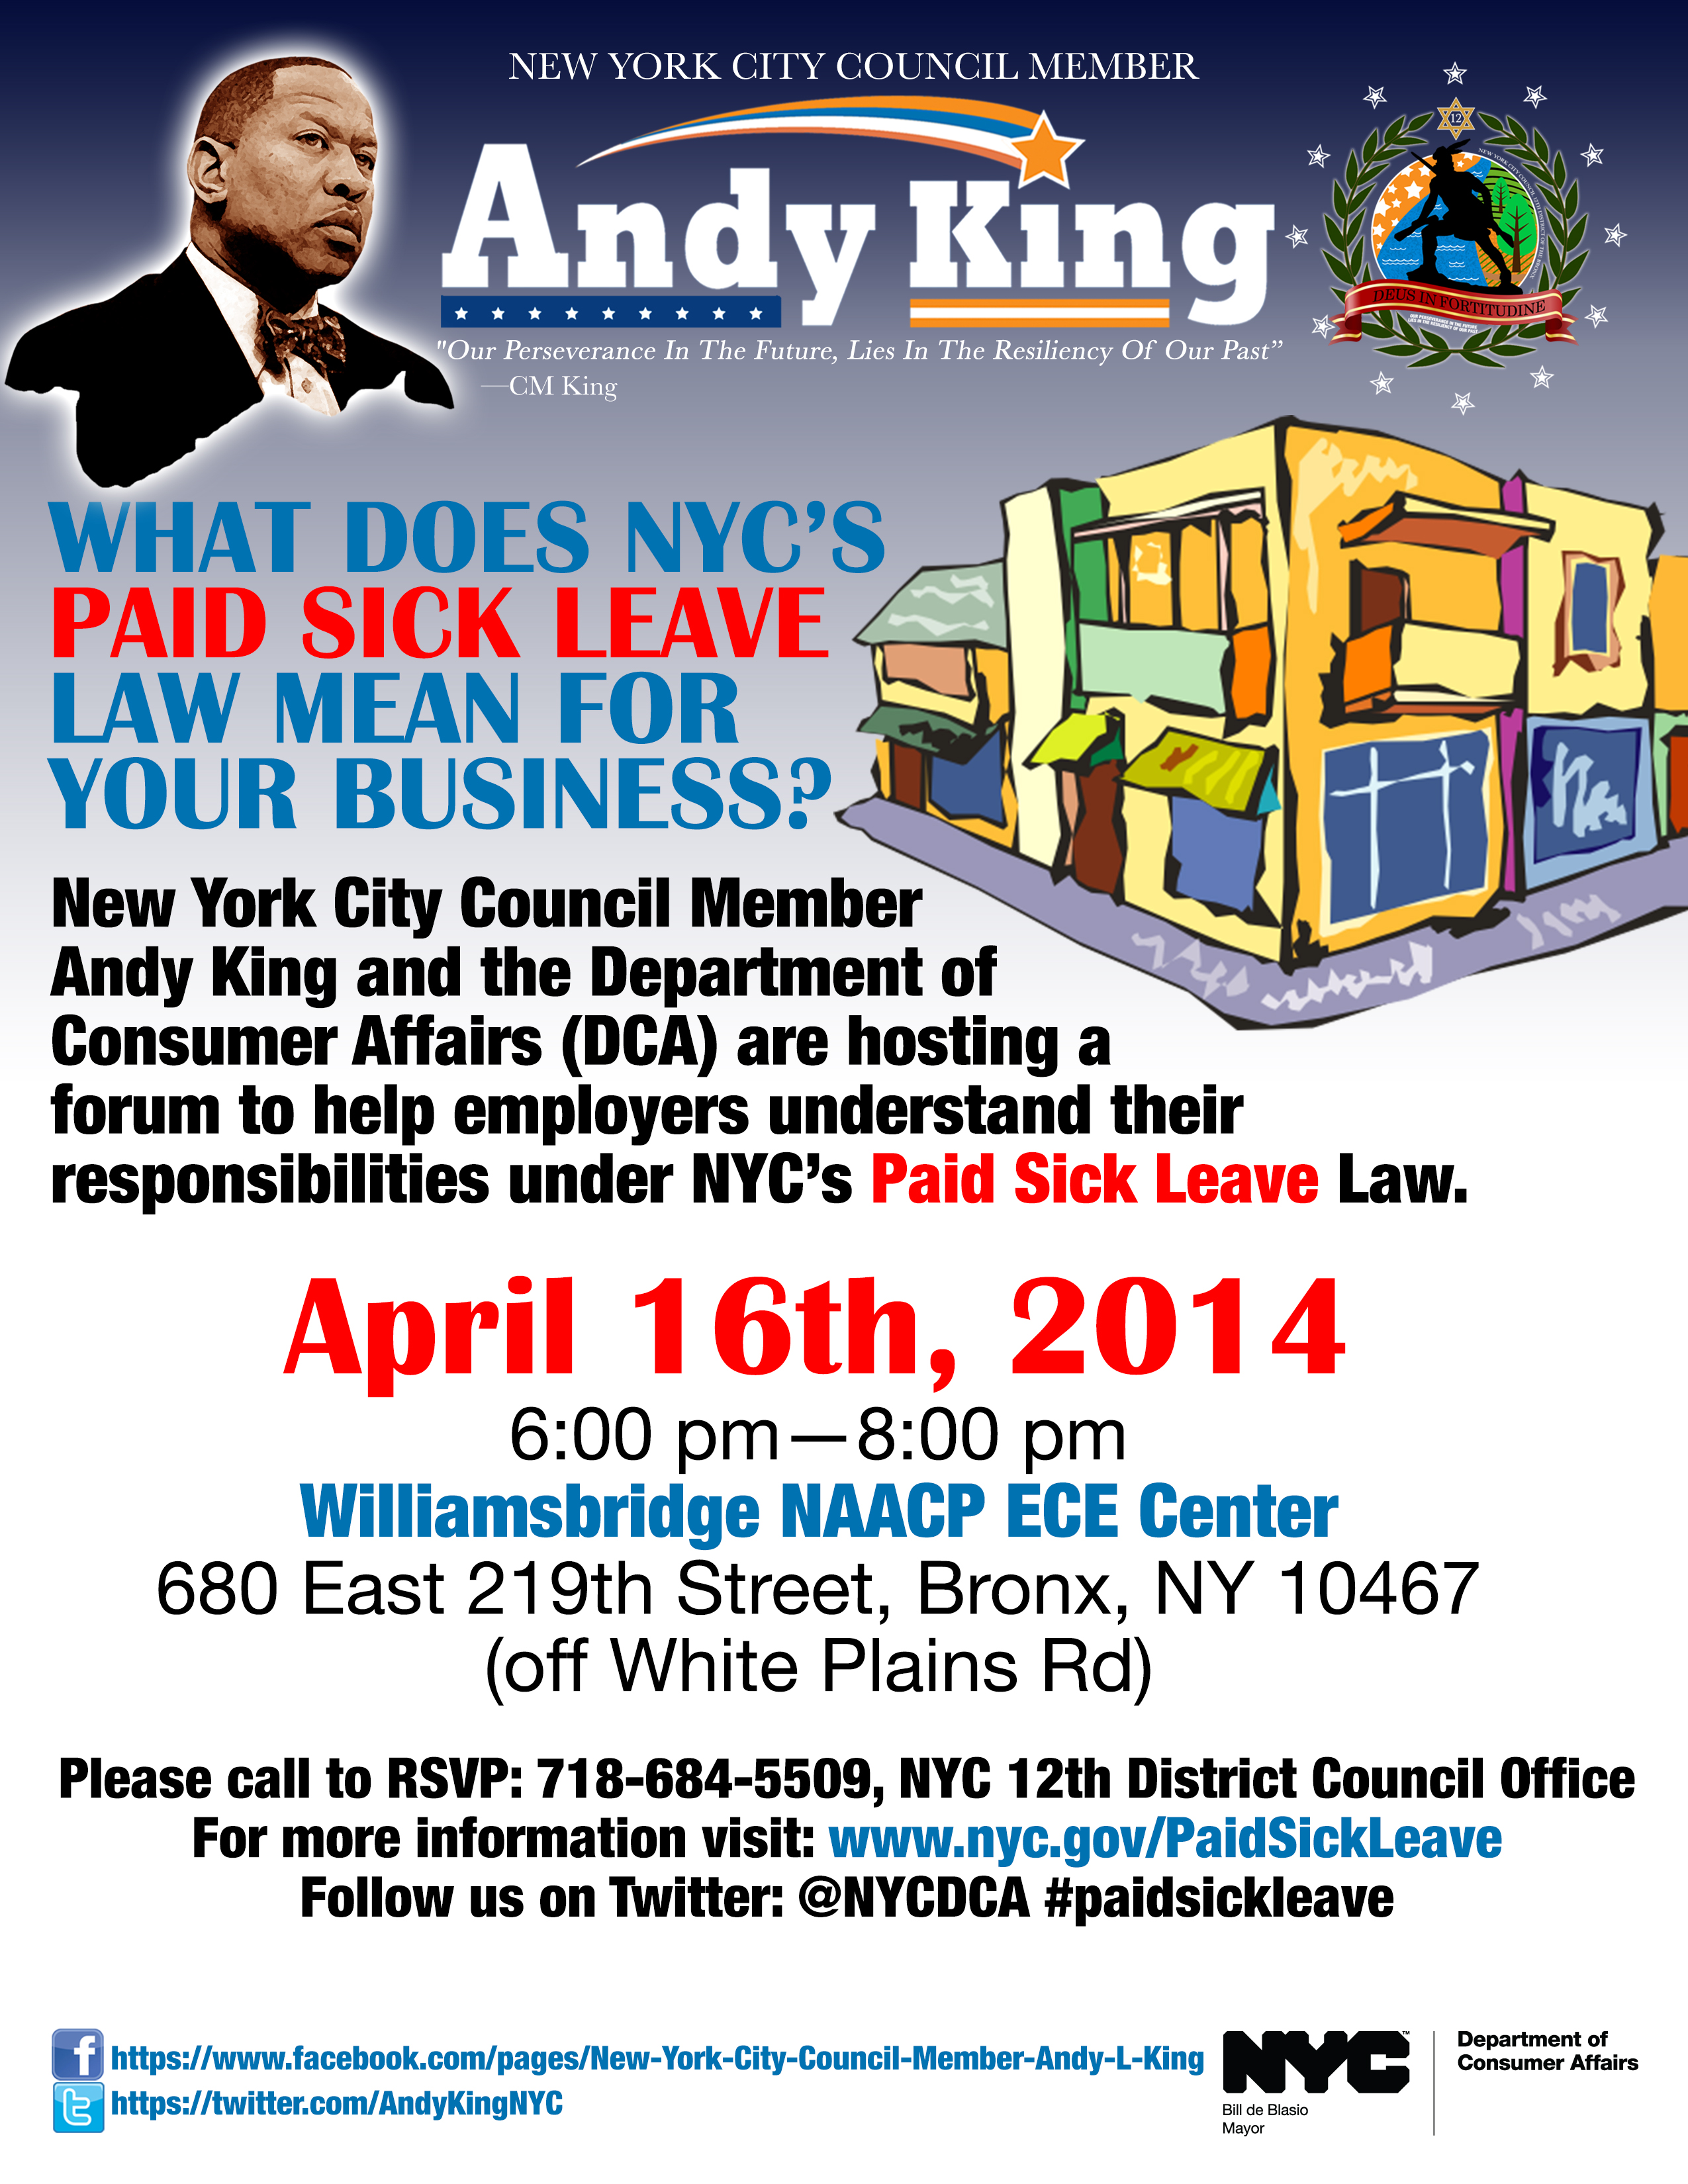 Paid Sick Leave Forum In Wakefield TONIGHT